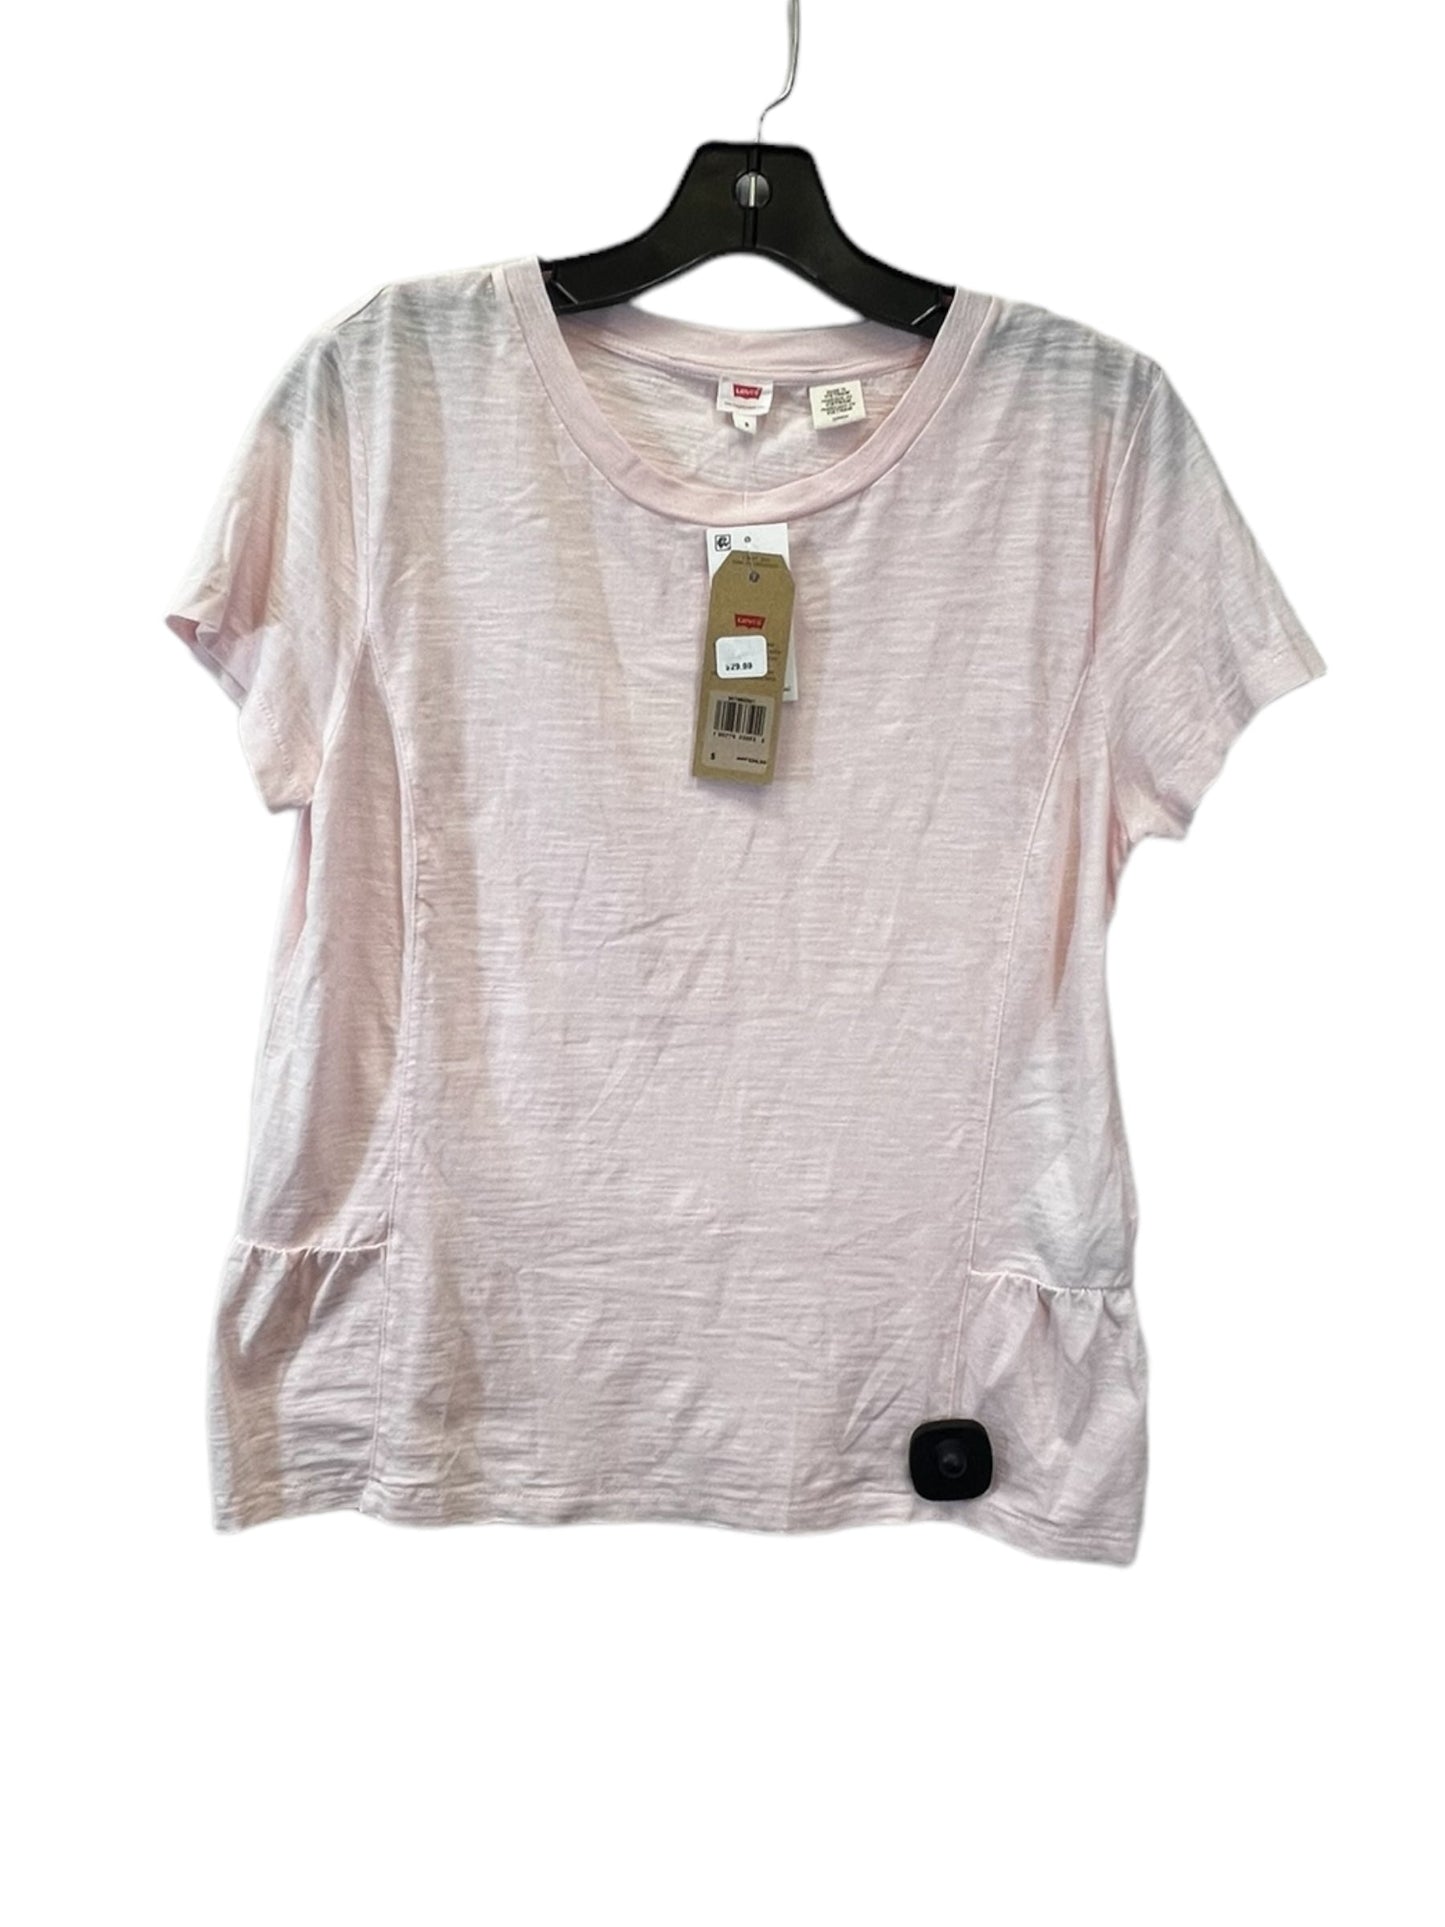 Pink Top Short Sleeve Levis, Size S